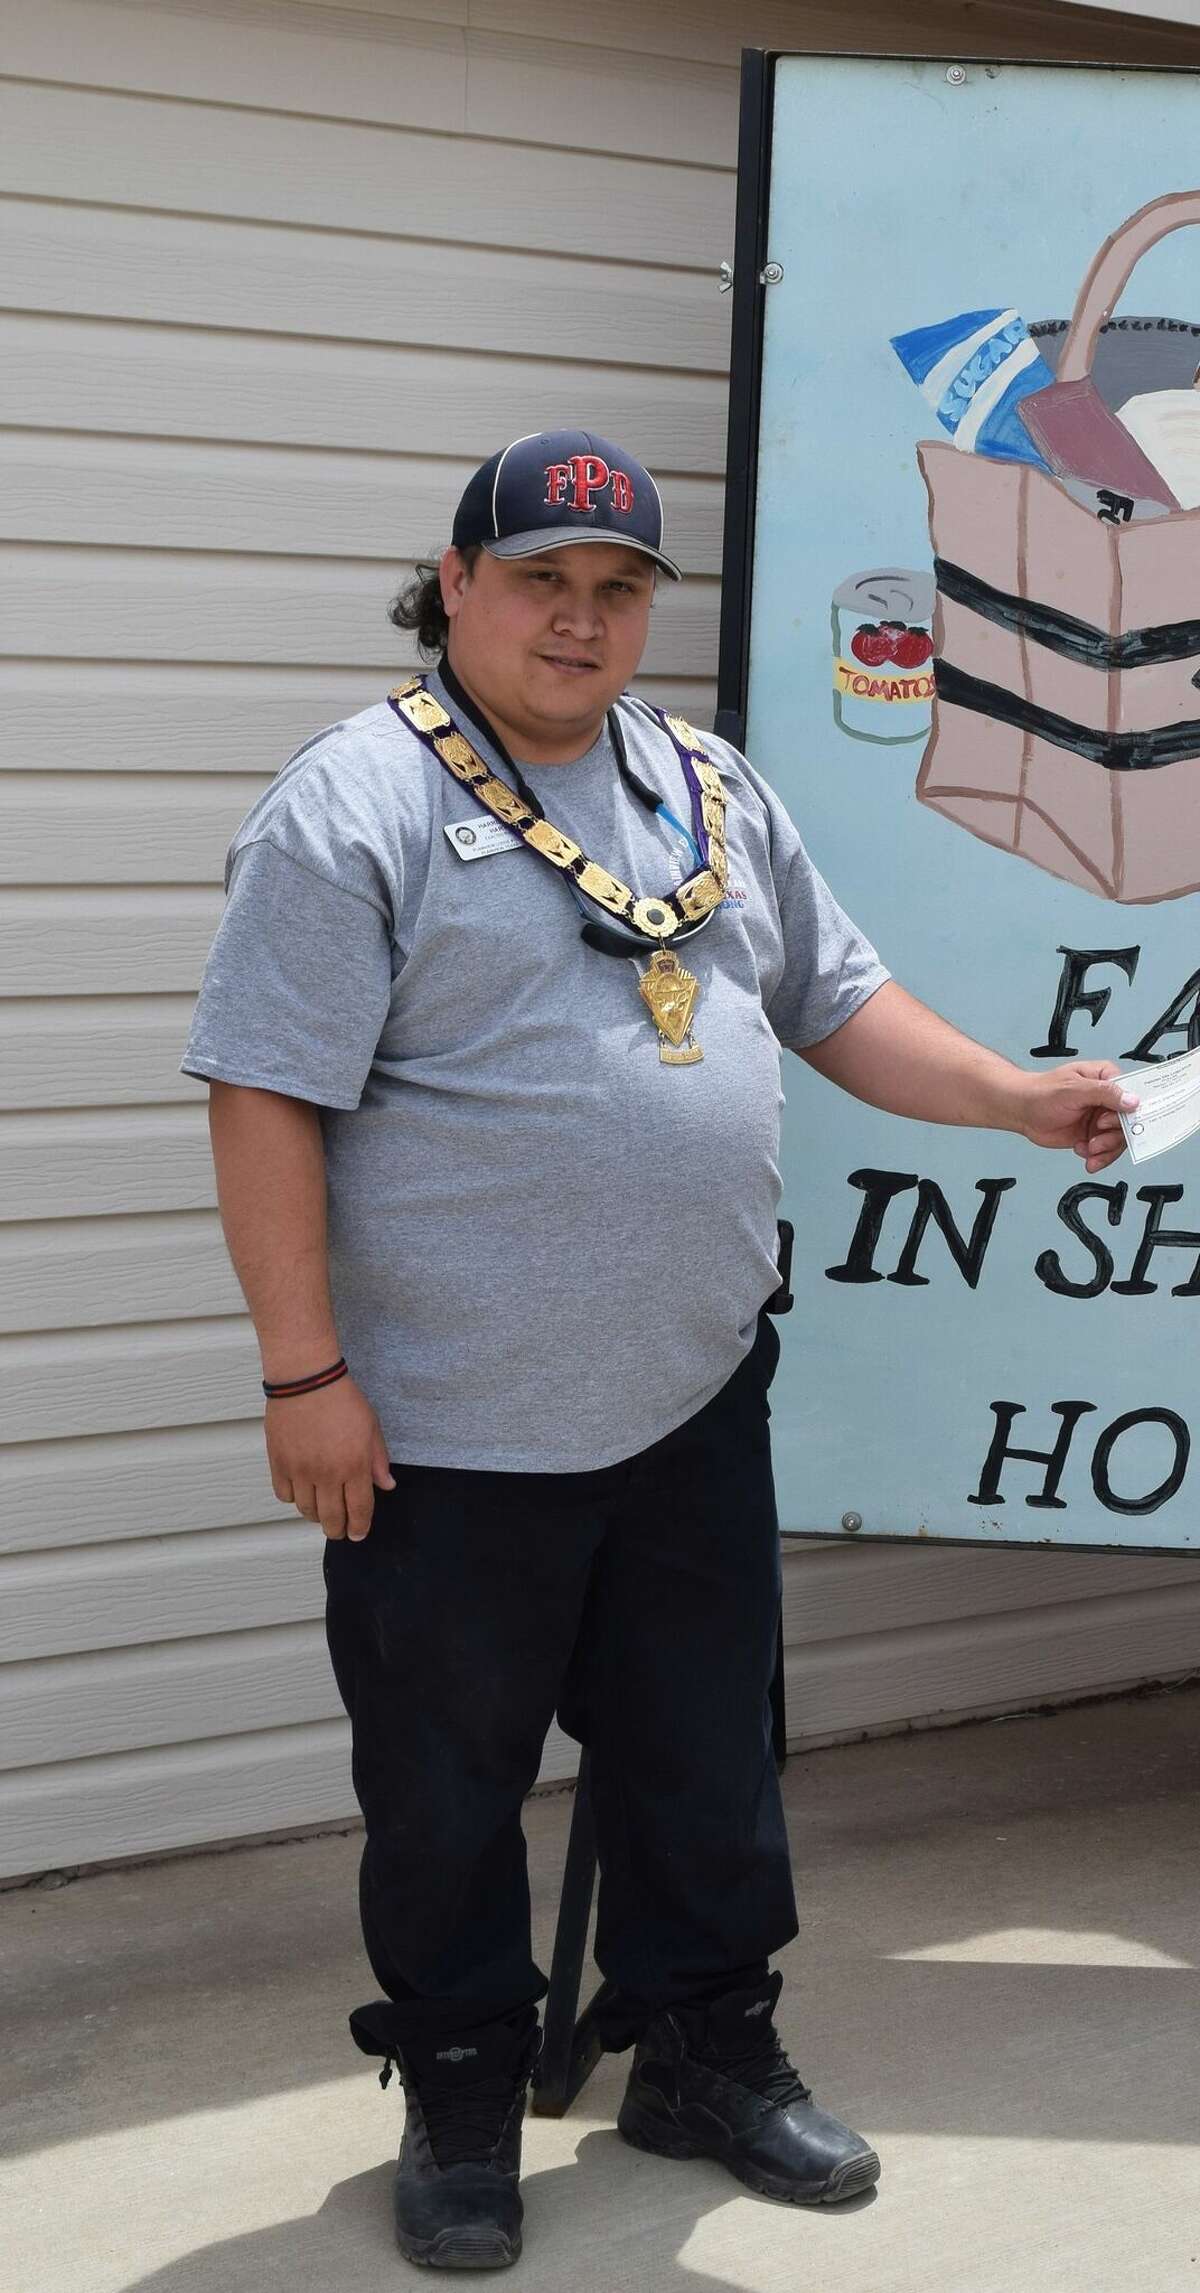 Harrison Hart, on behalf of the Plainview Elks Lodge, presents a donation to Faith In Sharing House on May 15, 2020.  (File Photo: May 15, 2020)